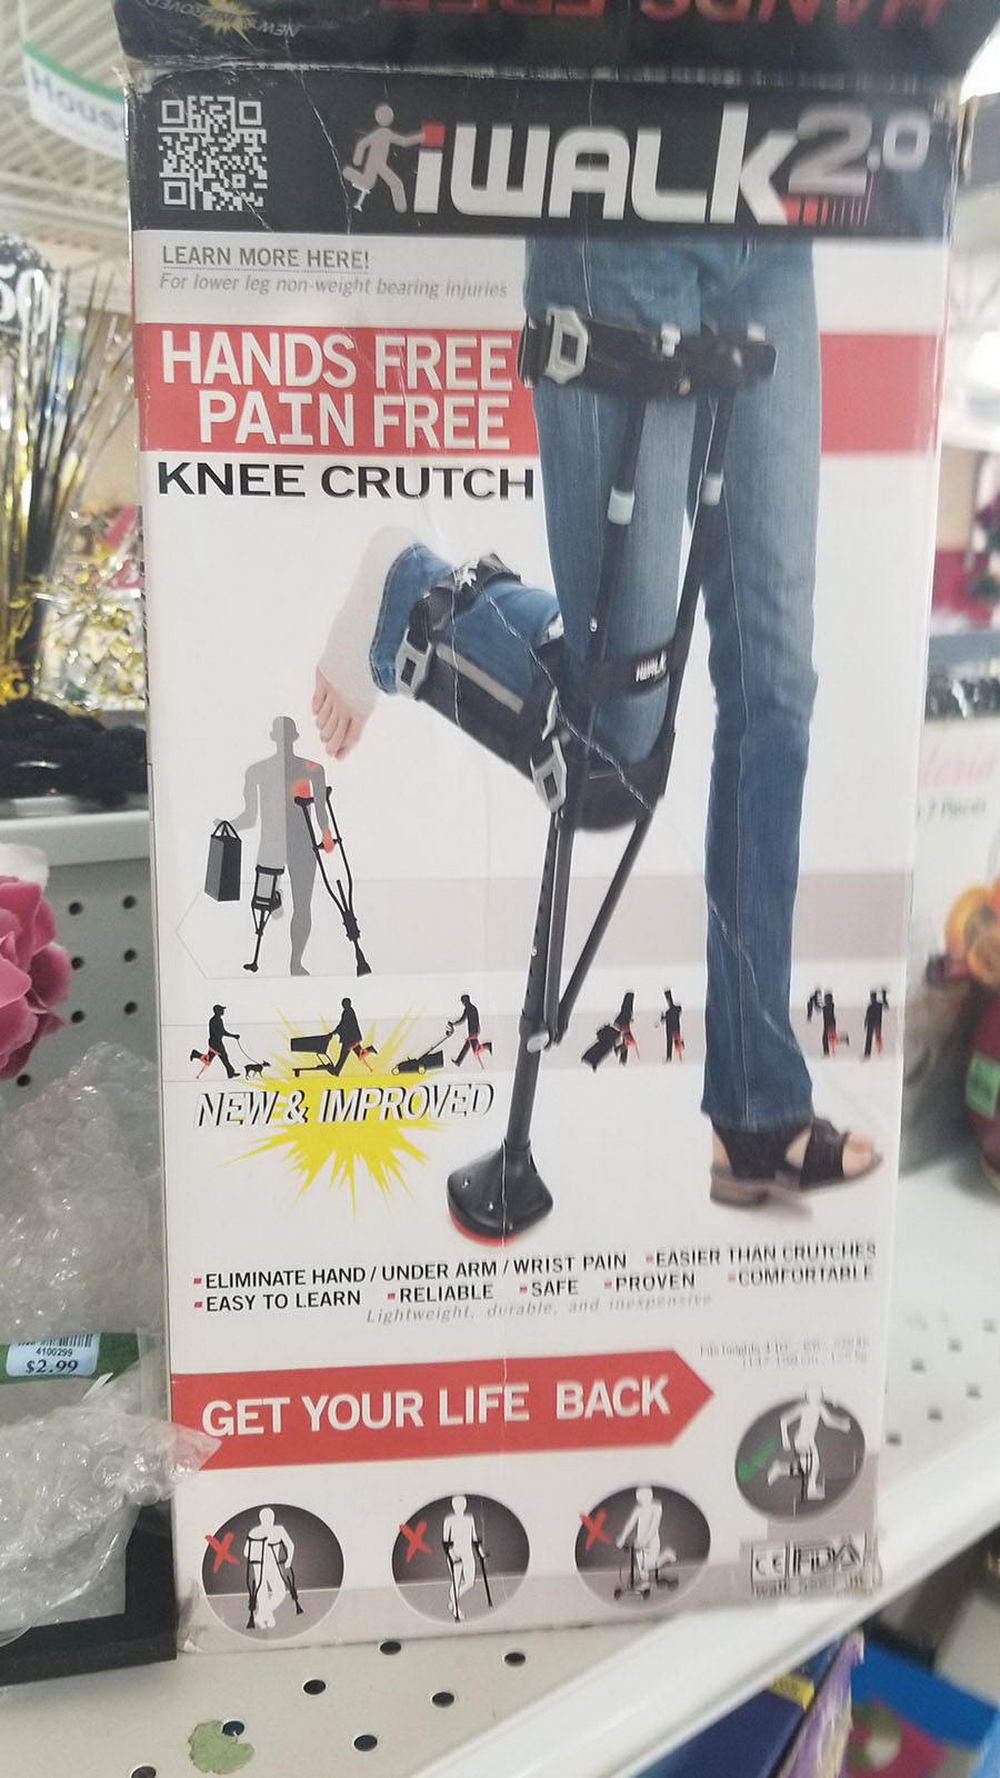 hobby - Veron Kwalk 2017 Learn More Here! For lower leg nonweight bearing injuries Hands Free. Pain Free Knee Crutch New & Improved Easier Than Crutches Eliminate HandUnder ArmWrist Pain Proven Comfortable Easy To Learn Reliable Safe Lightweight durable 2